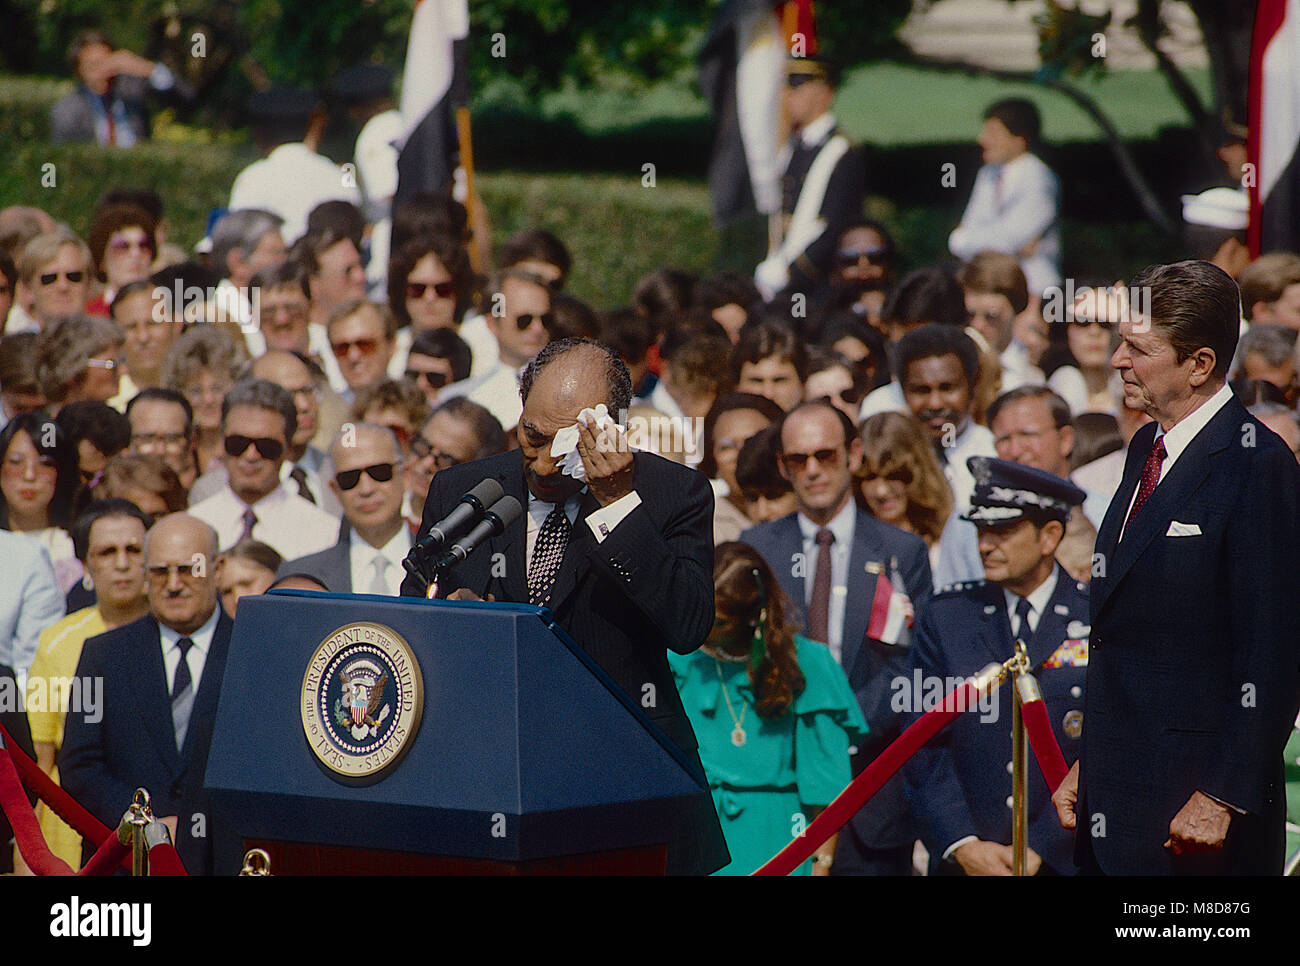 Washington, DC., USA, August 5, 1981  President Ronald Reagan and Egyptian President Anwar el-Sadat during the official welcoming ceremony on the South Lawn. Credit: Mark Reinstein/MediaPunch Stock Photo